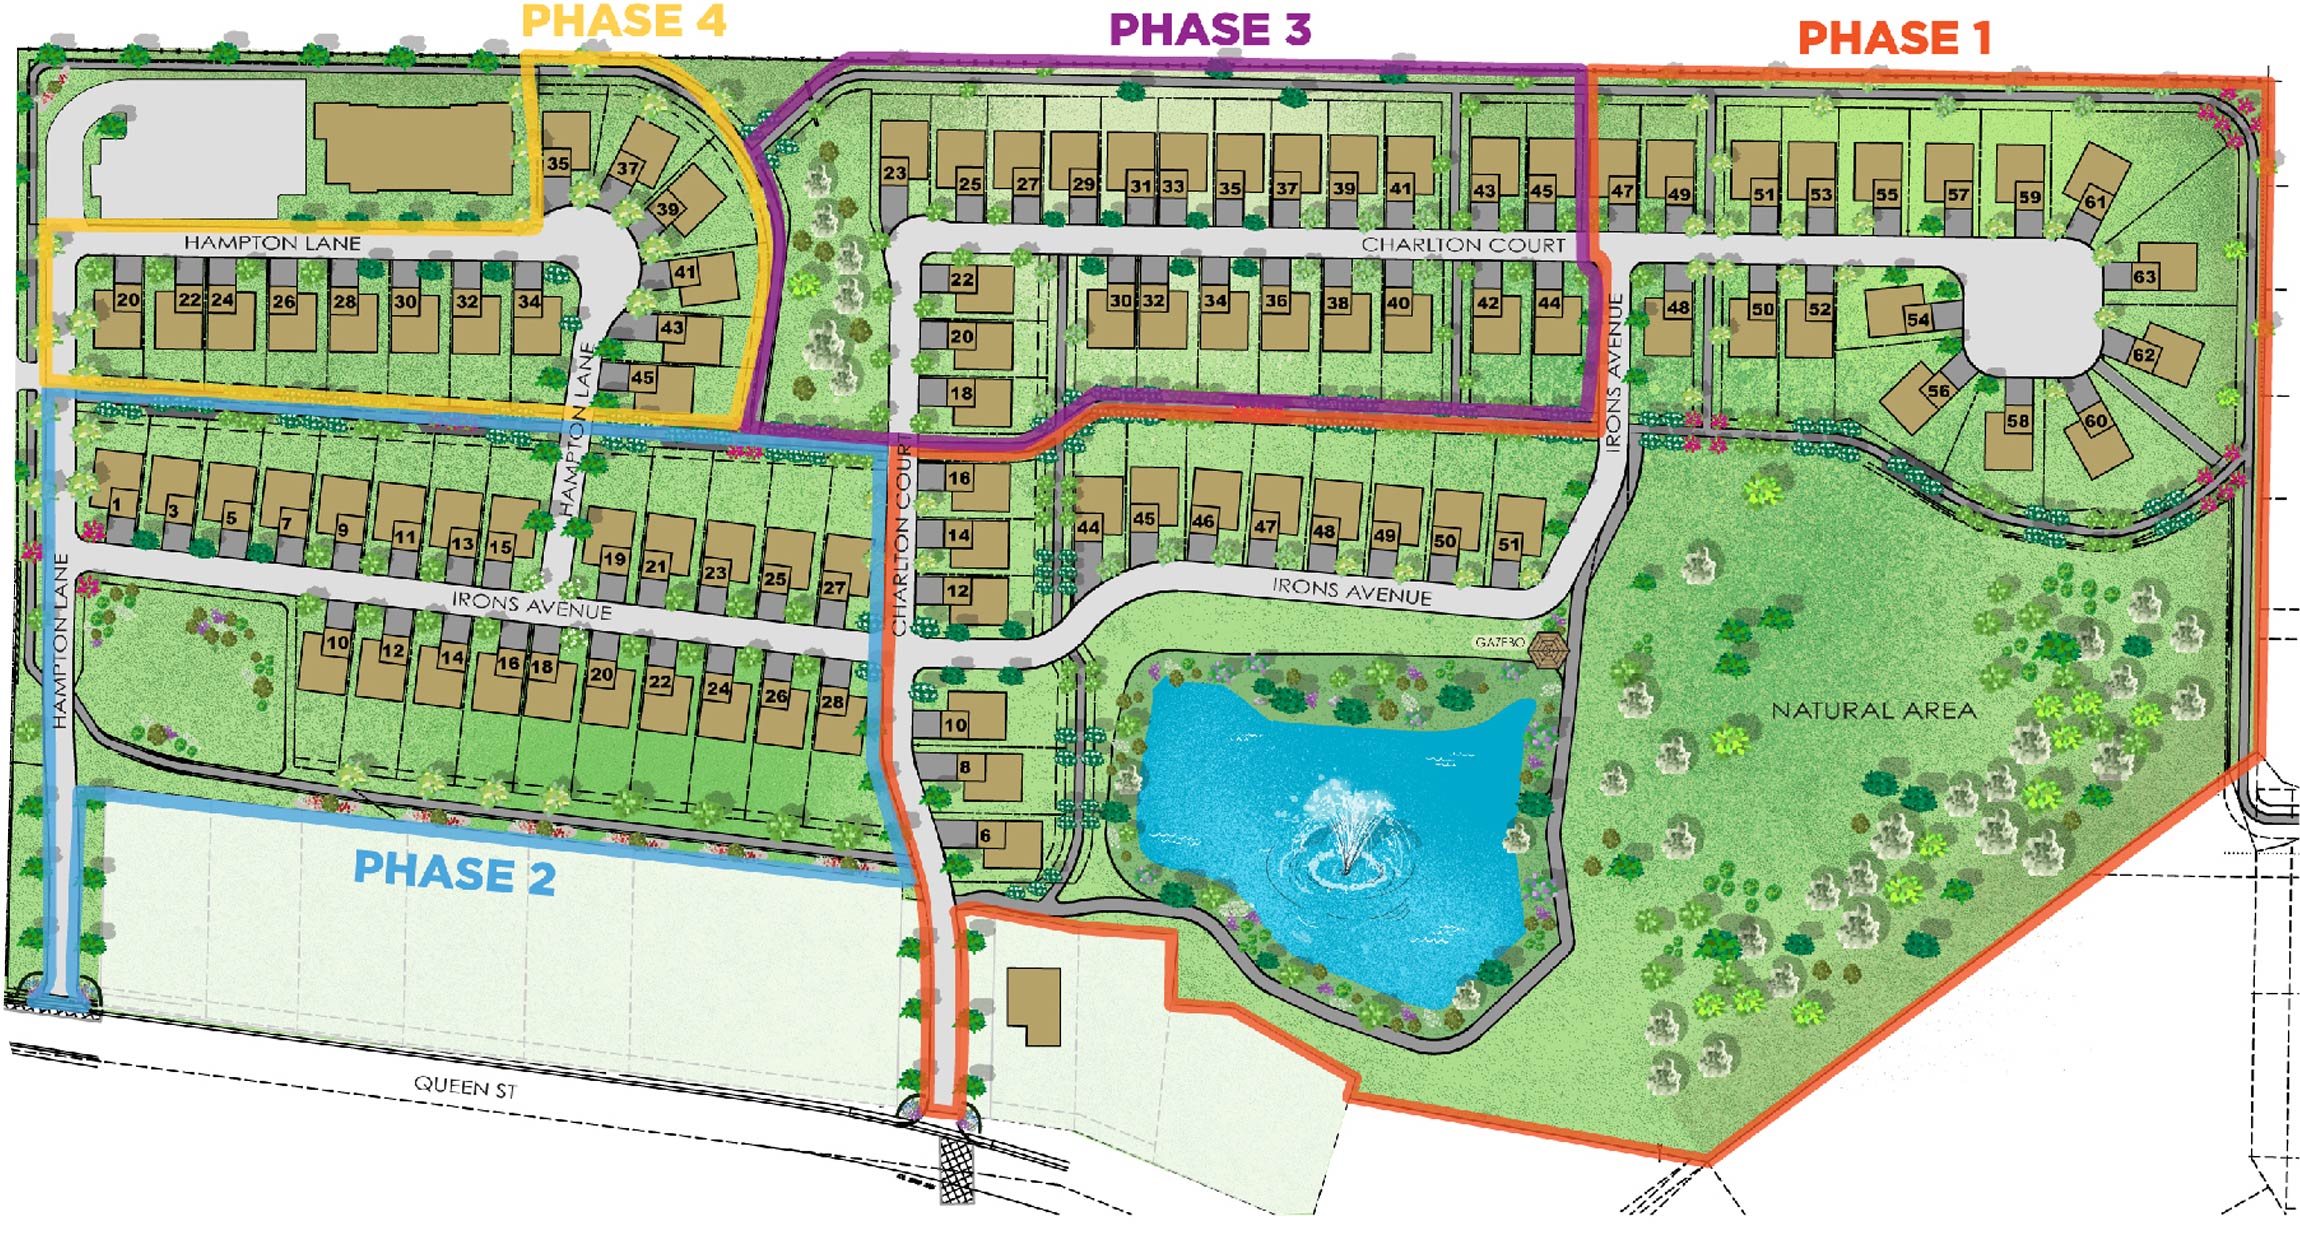 Plan view of Lilacs Lakefield community